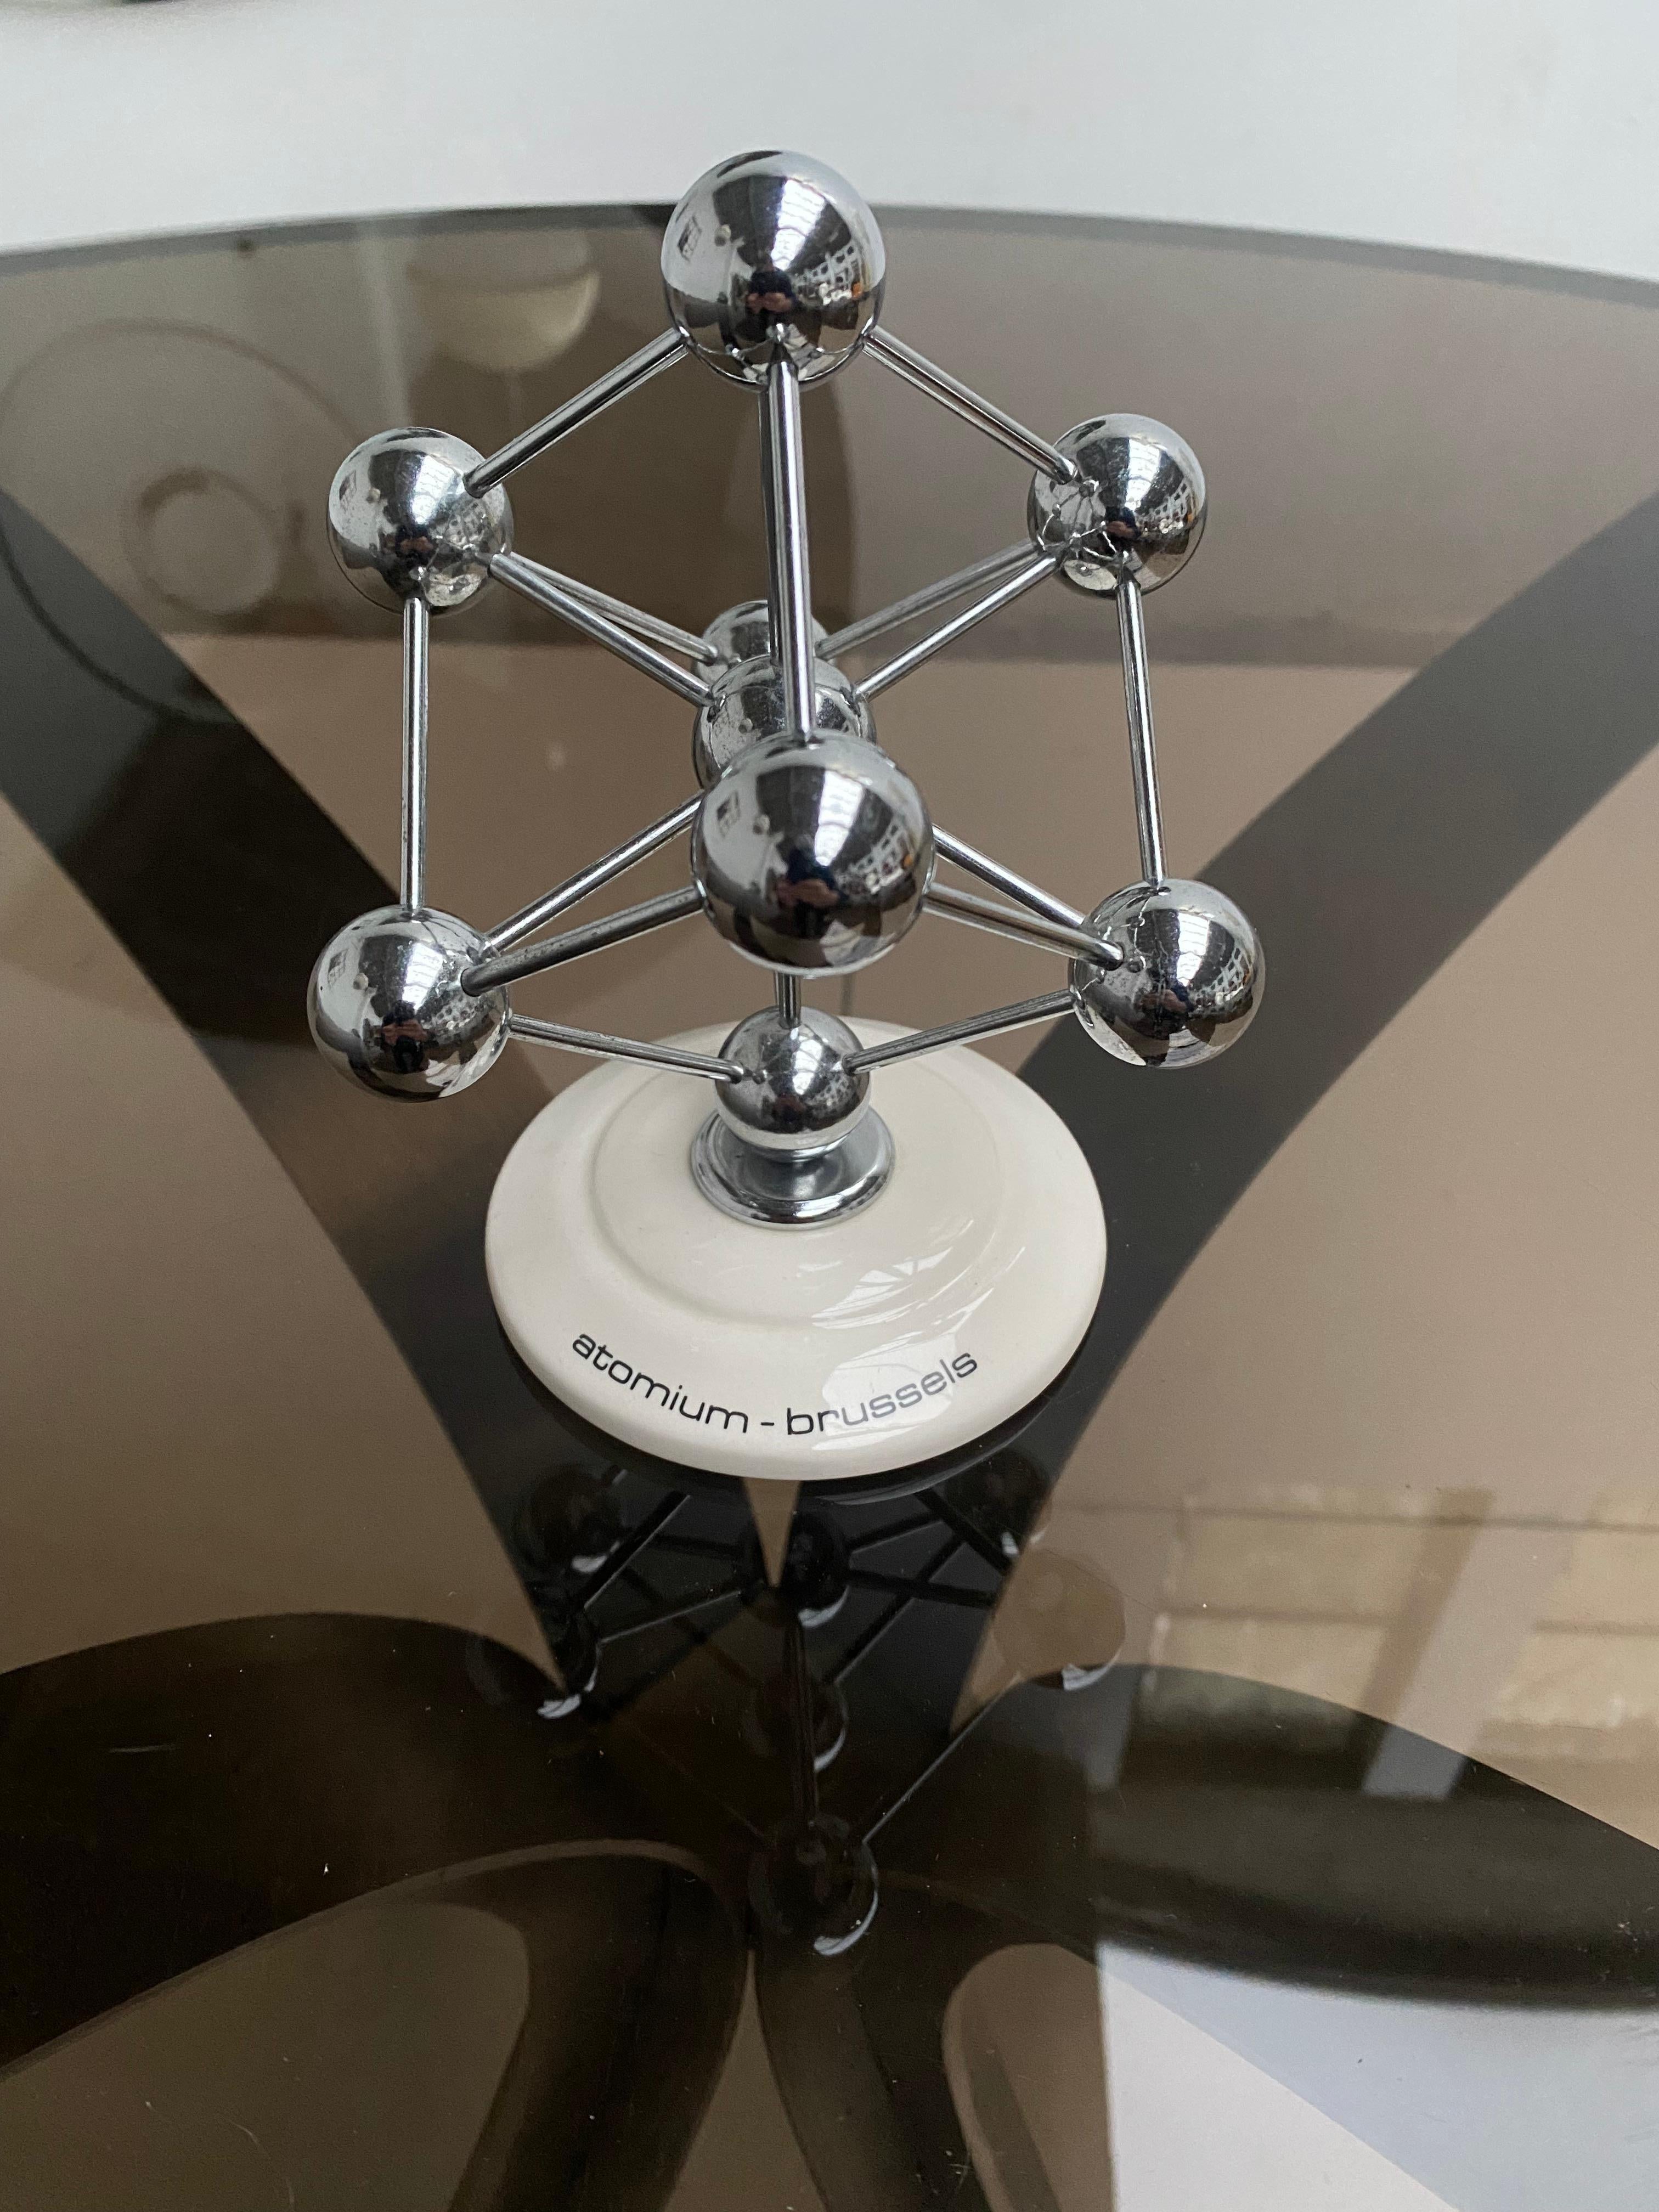 A lovely desk decoration from Brussels Belgium

The Atomium was built as the main pavilion and icon of the 1958 World's Fair of Brussels (Expo 58)
Faith in scientific progress was great, and a structure depicting atoms was chosen to embody this

The